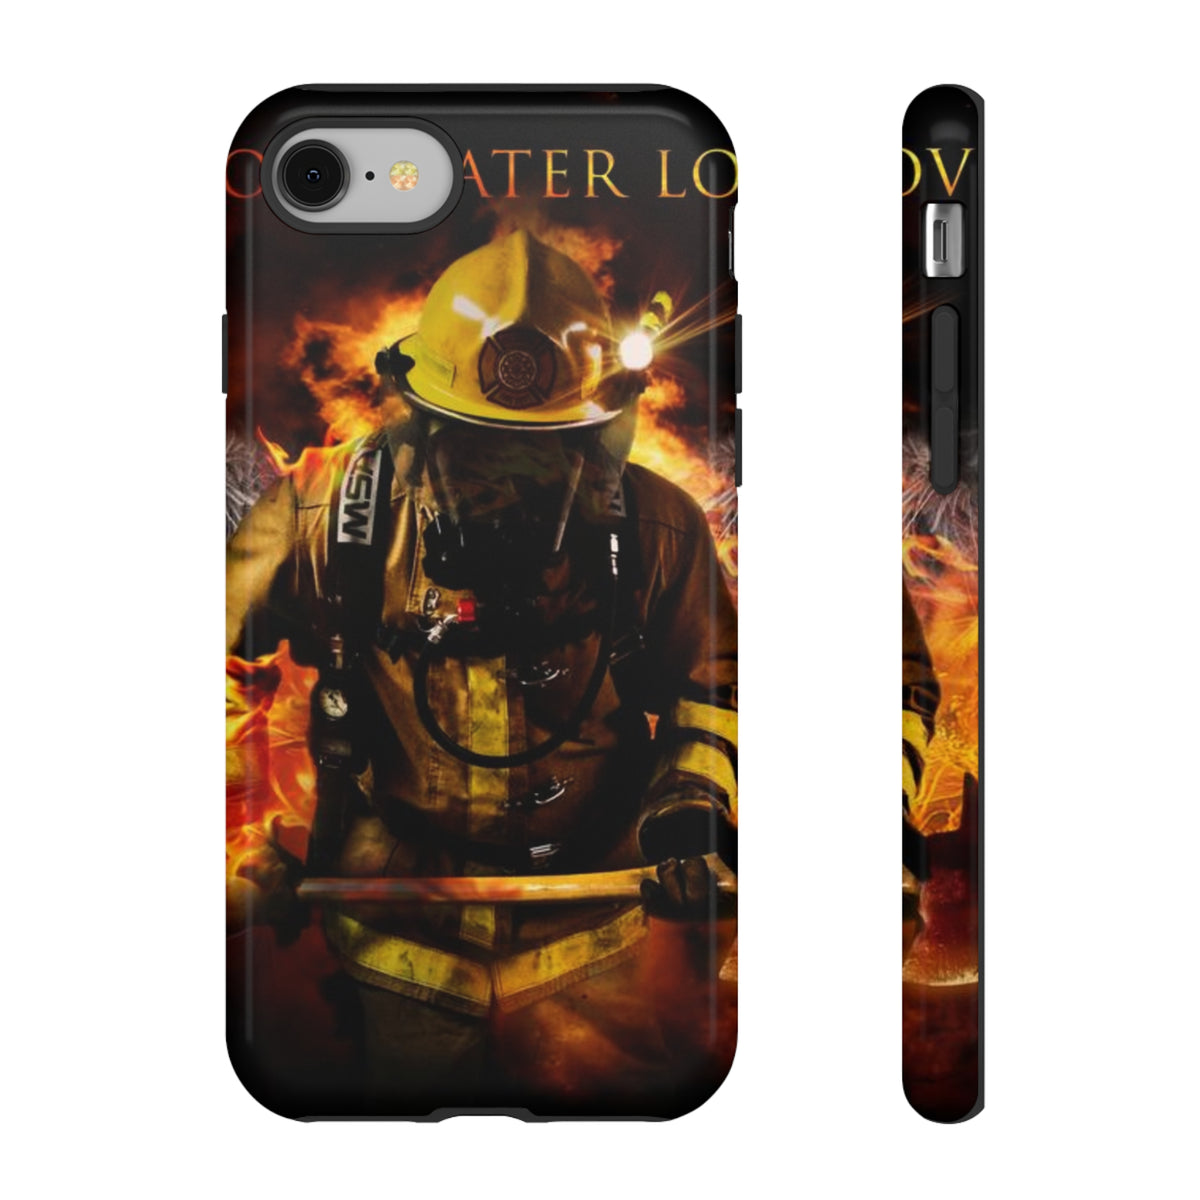 NGL Firefighter Tough Phone Cases